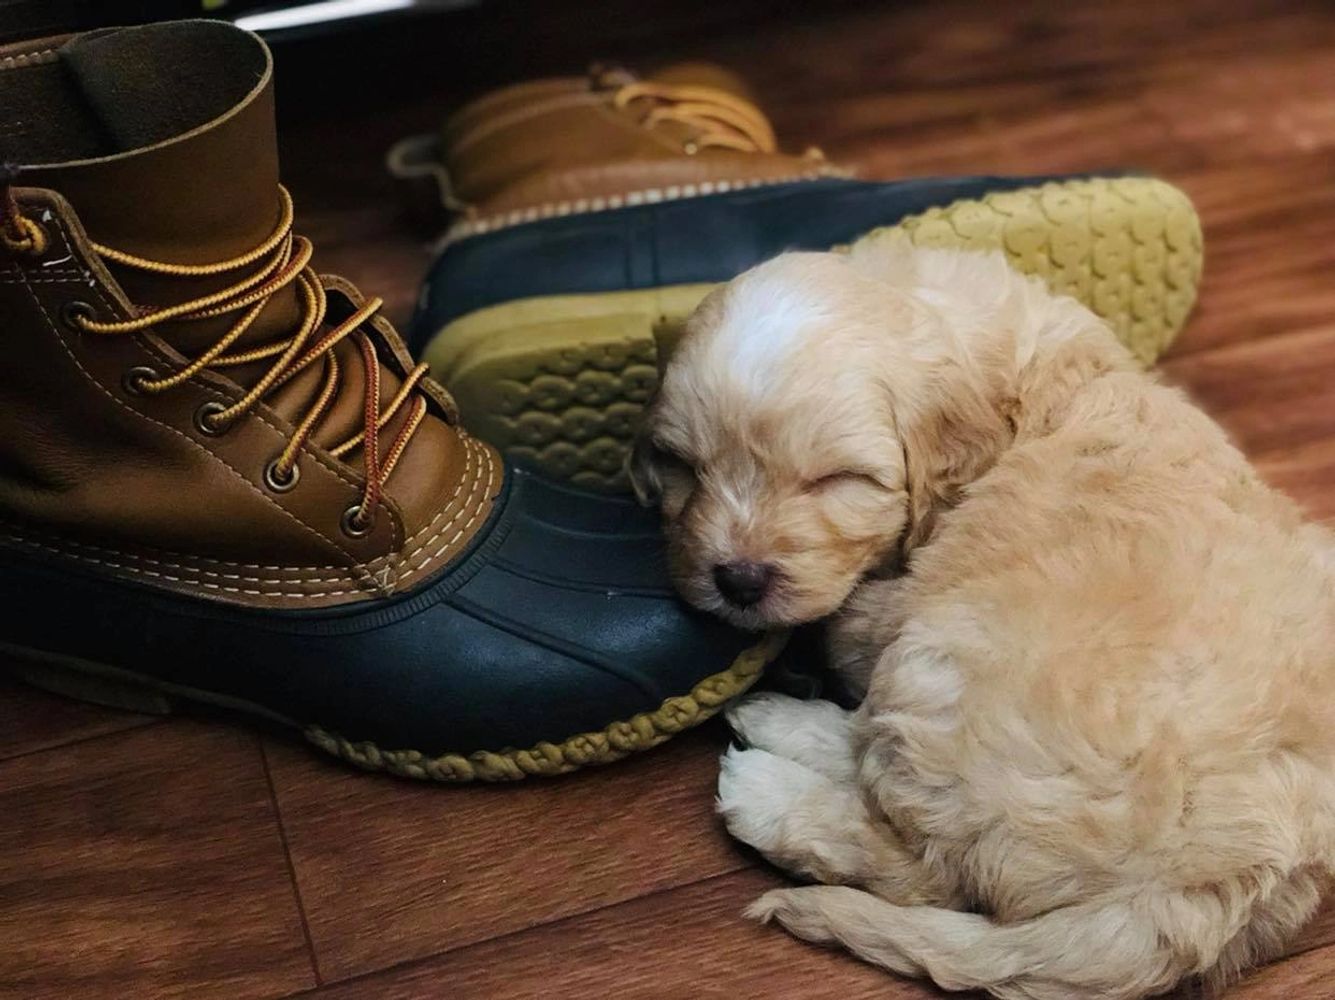 An Australian labradoodle with the shoes